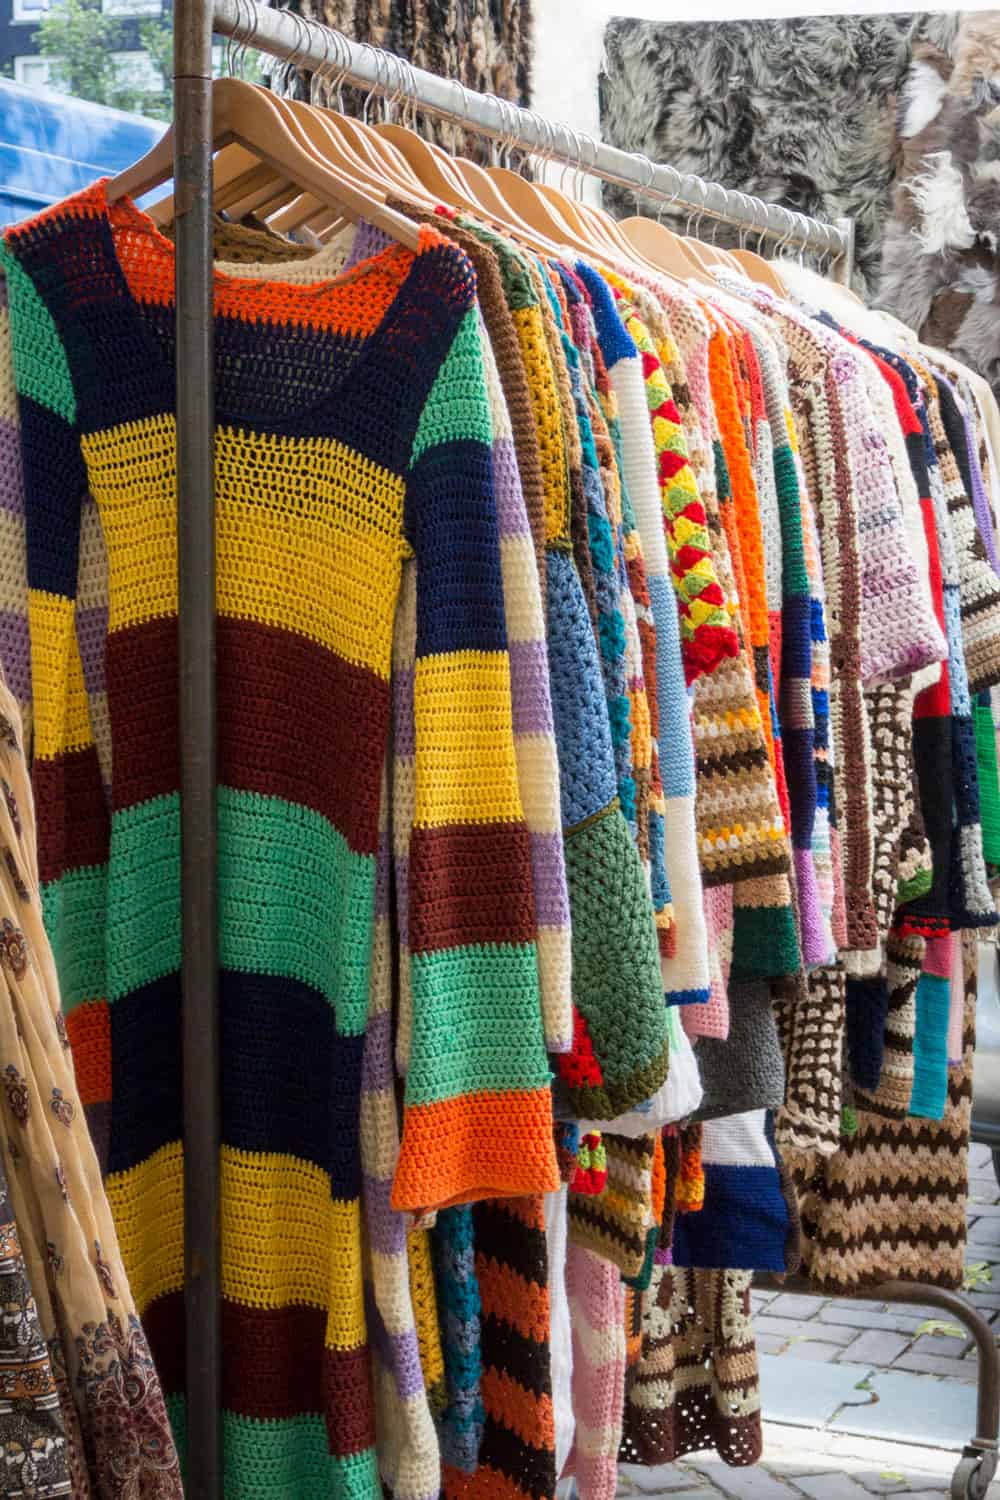 A rail of colourful crocheted clothes hanging